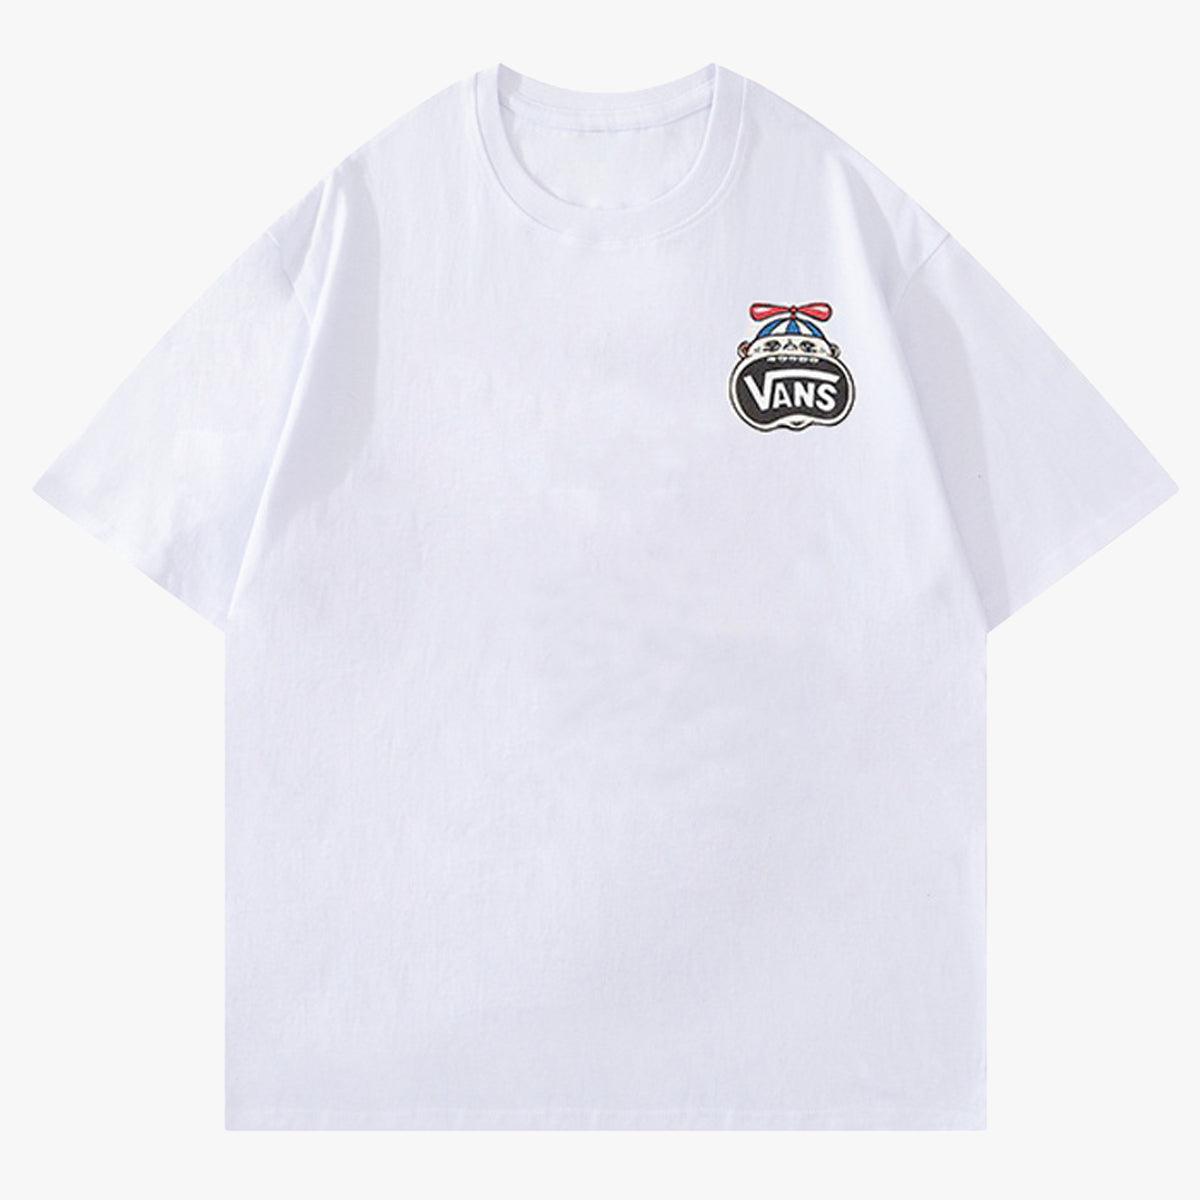 Vans 66 Good Things Trippy T-Shirt - Aesthetic Clothes Shop